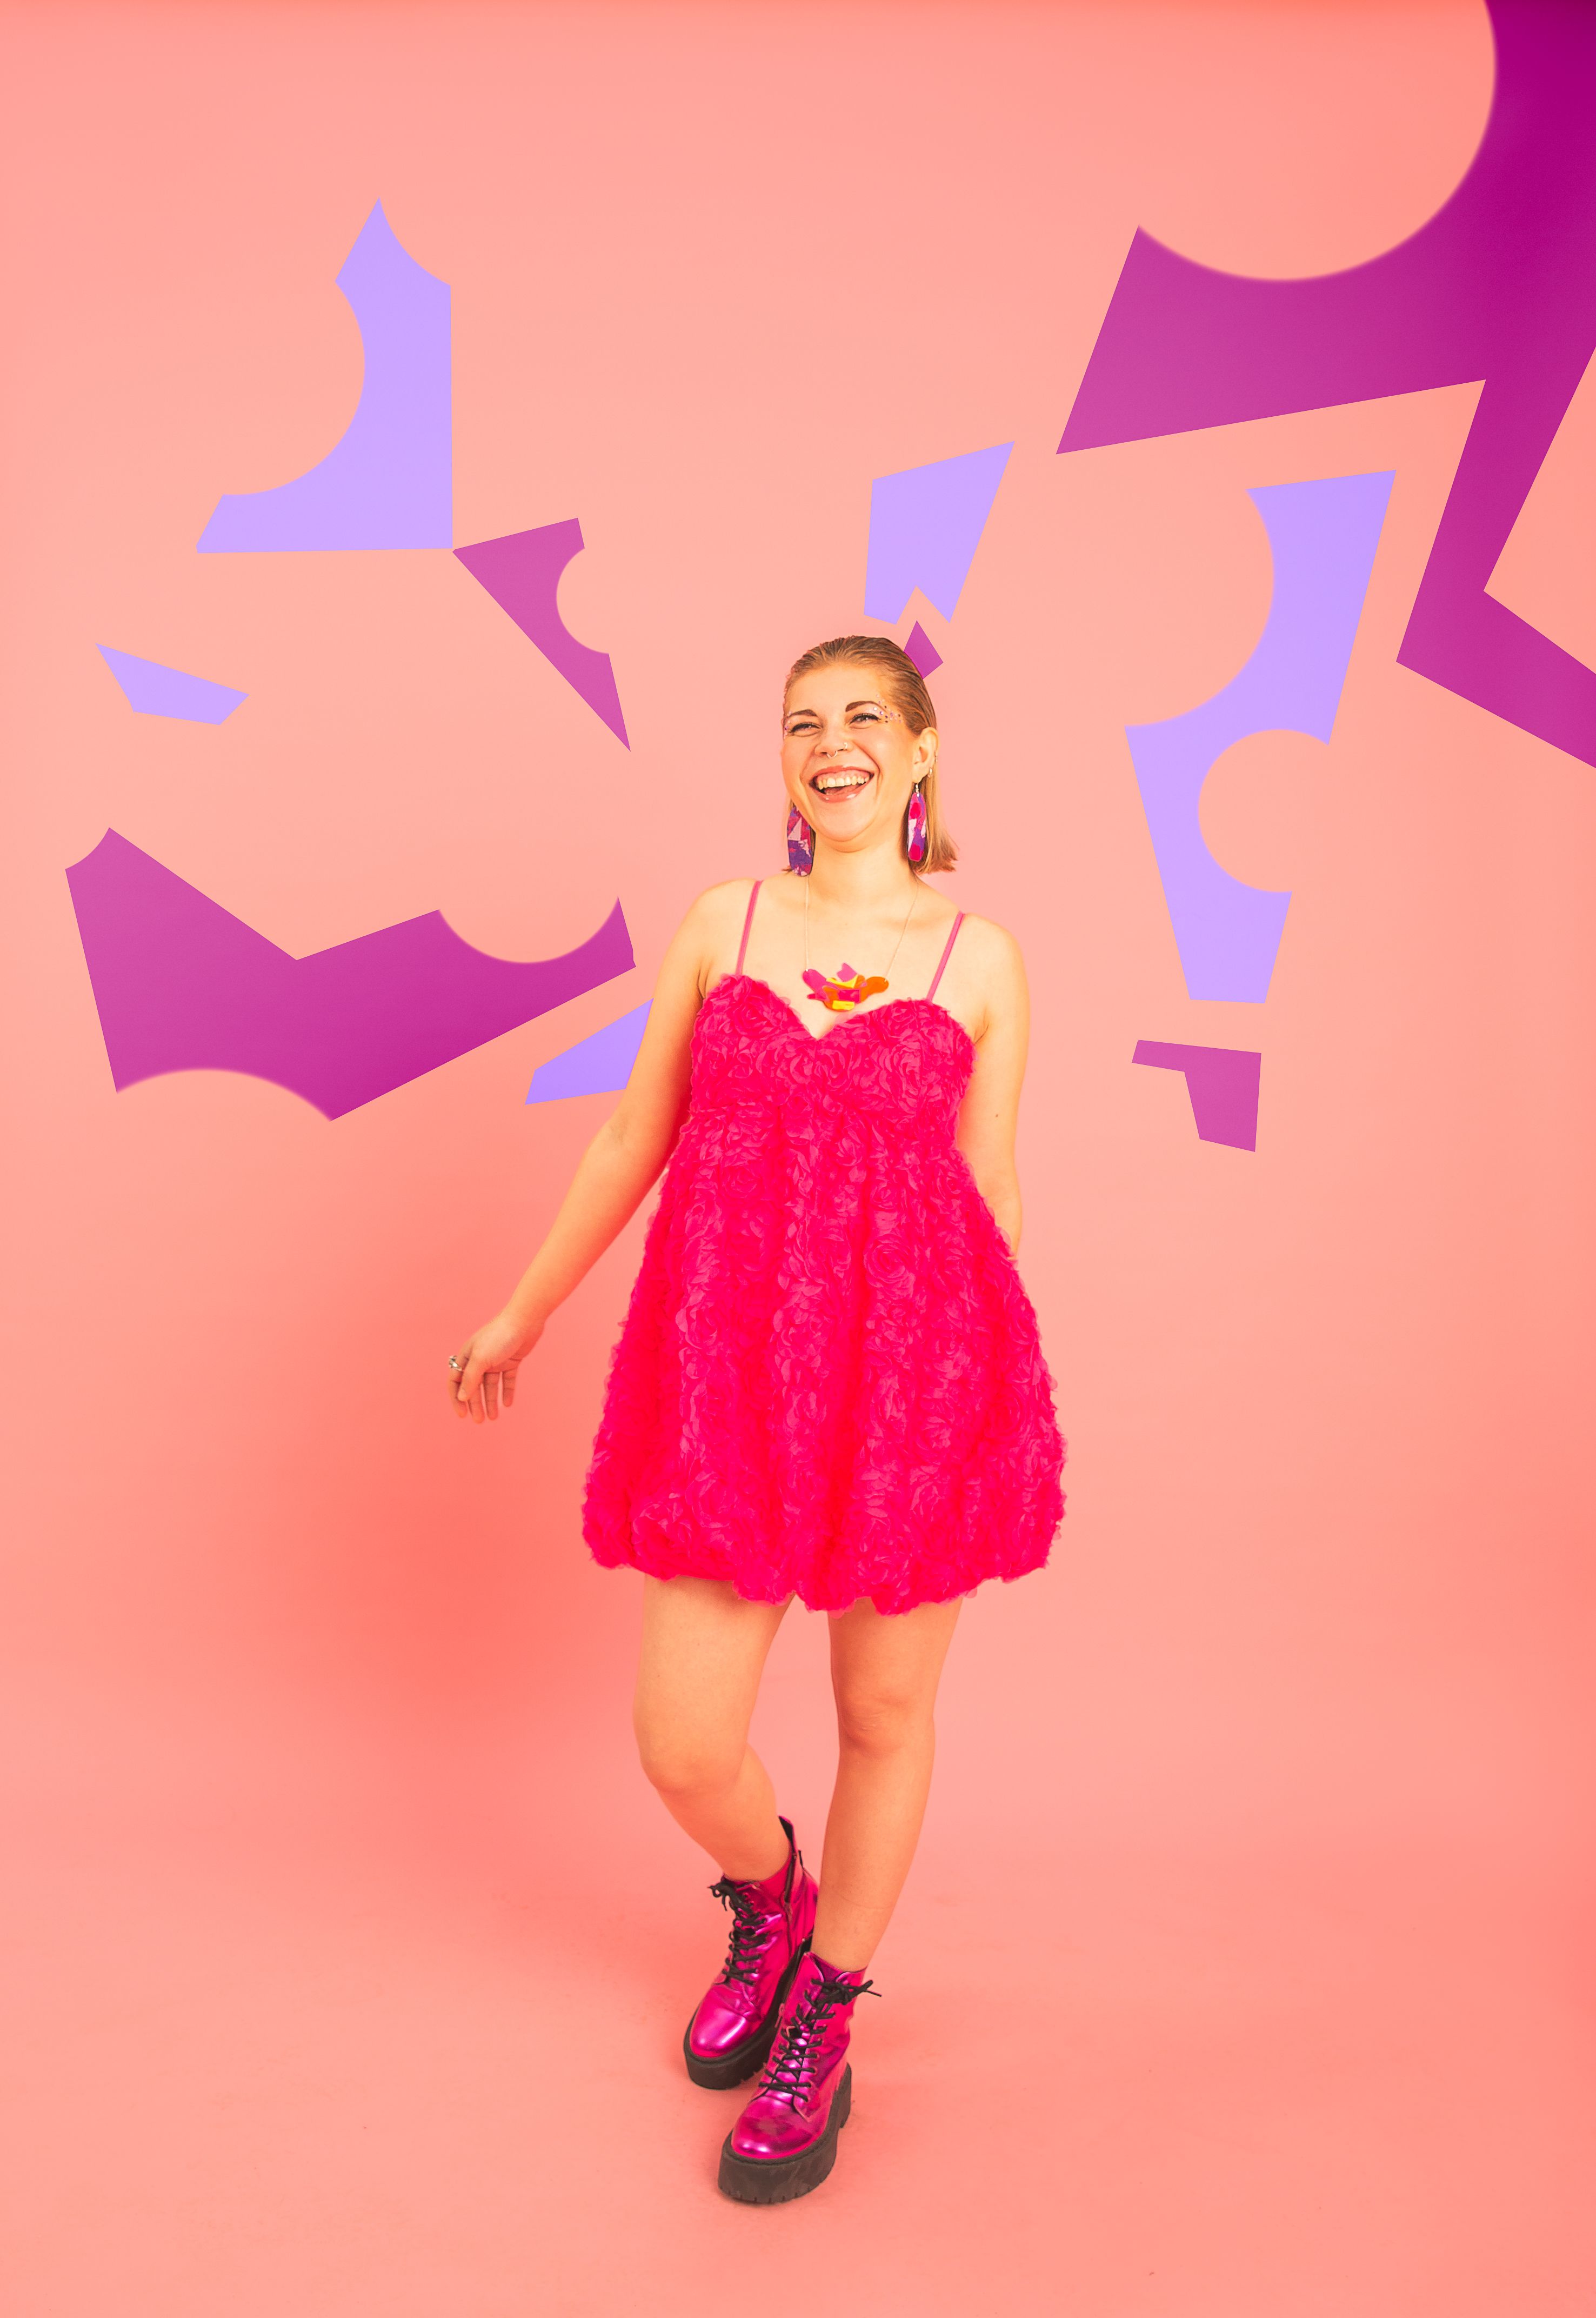 Sian is wearing a pinky mini dress and metallic pink boots. The background is pale pink and there's light and dark purple abstract shapes around her